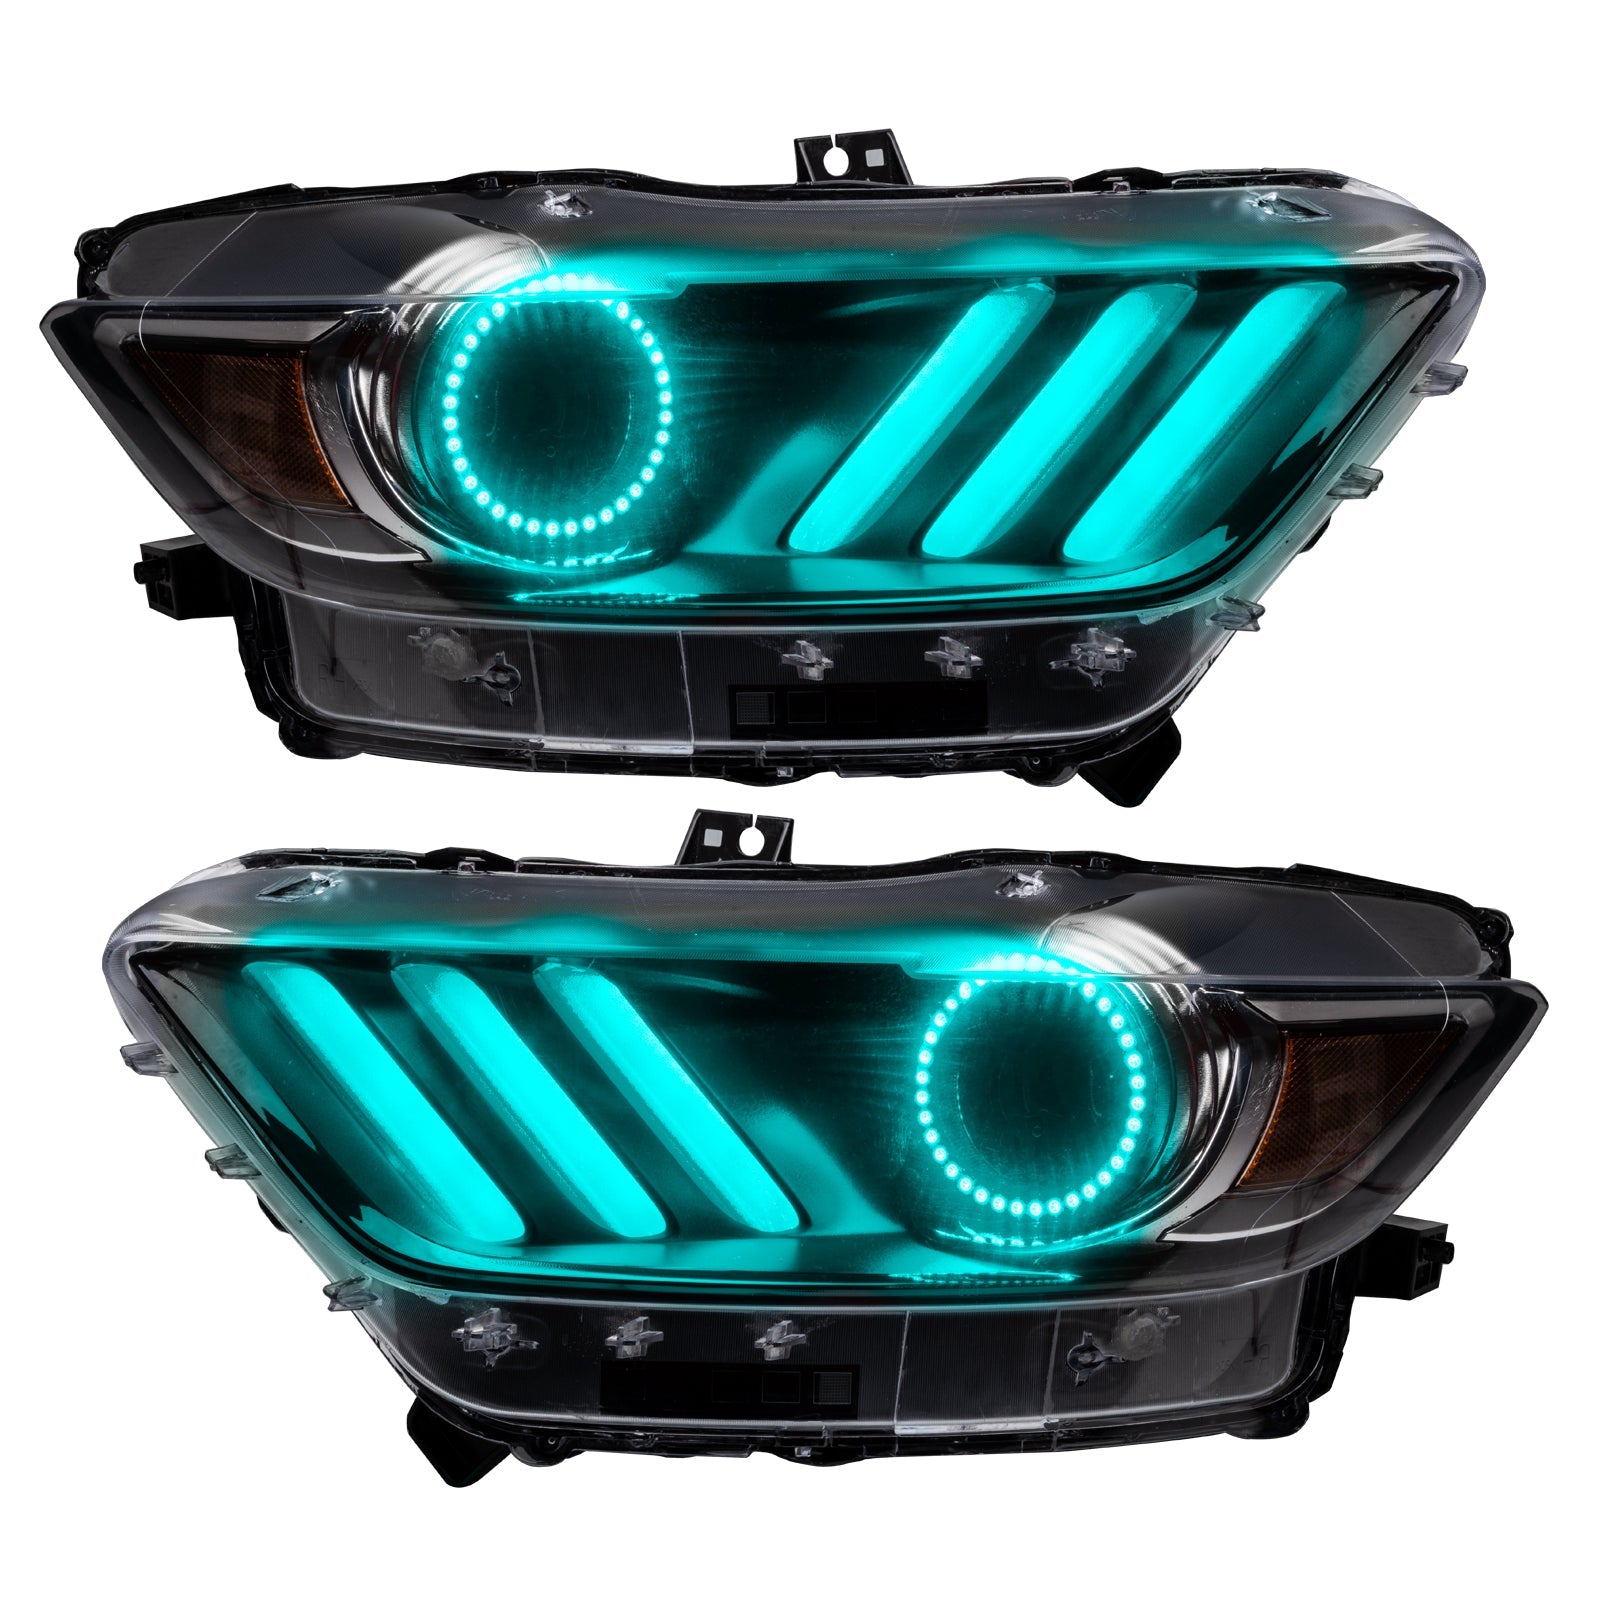 ORACLE Lighting 2015-2017 Ford Mustang V6/GT/Shelby ColorSHIFT DRL Upgrade w/Halo Kit